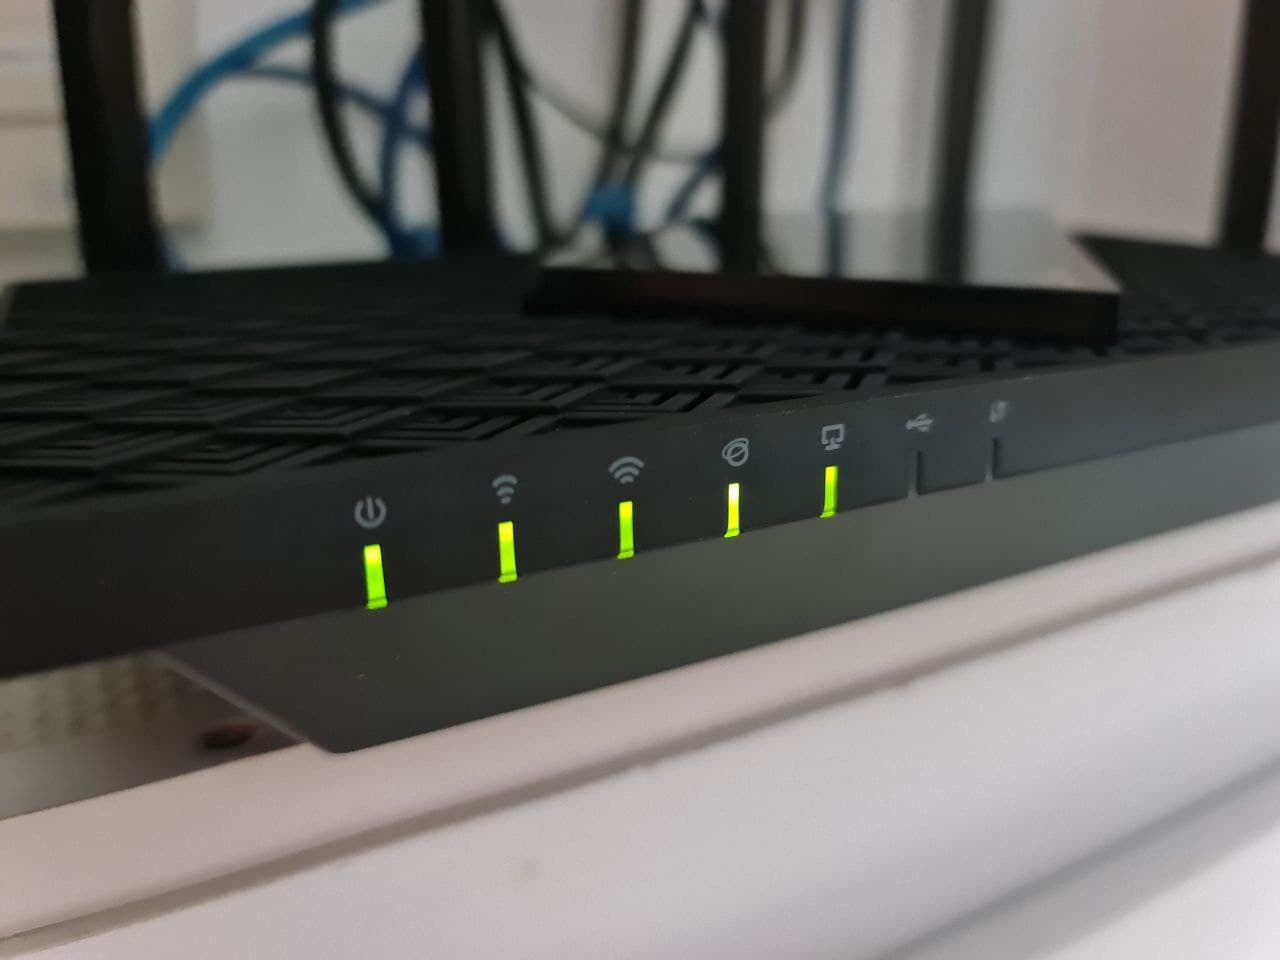 Geek Review: TP-Link Archer AX72 Router - Clear LED indicators